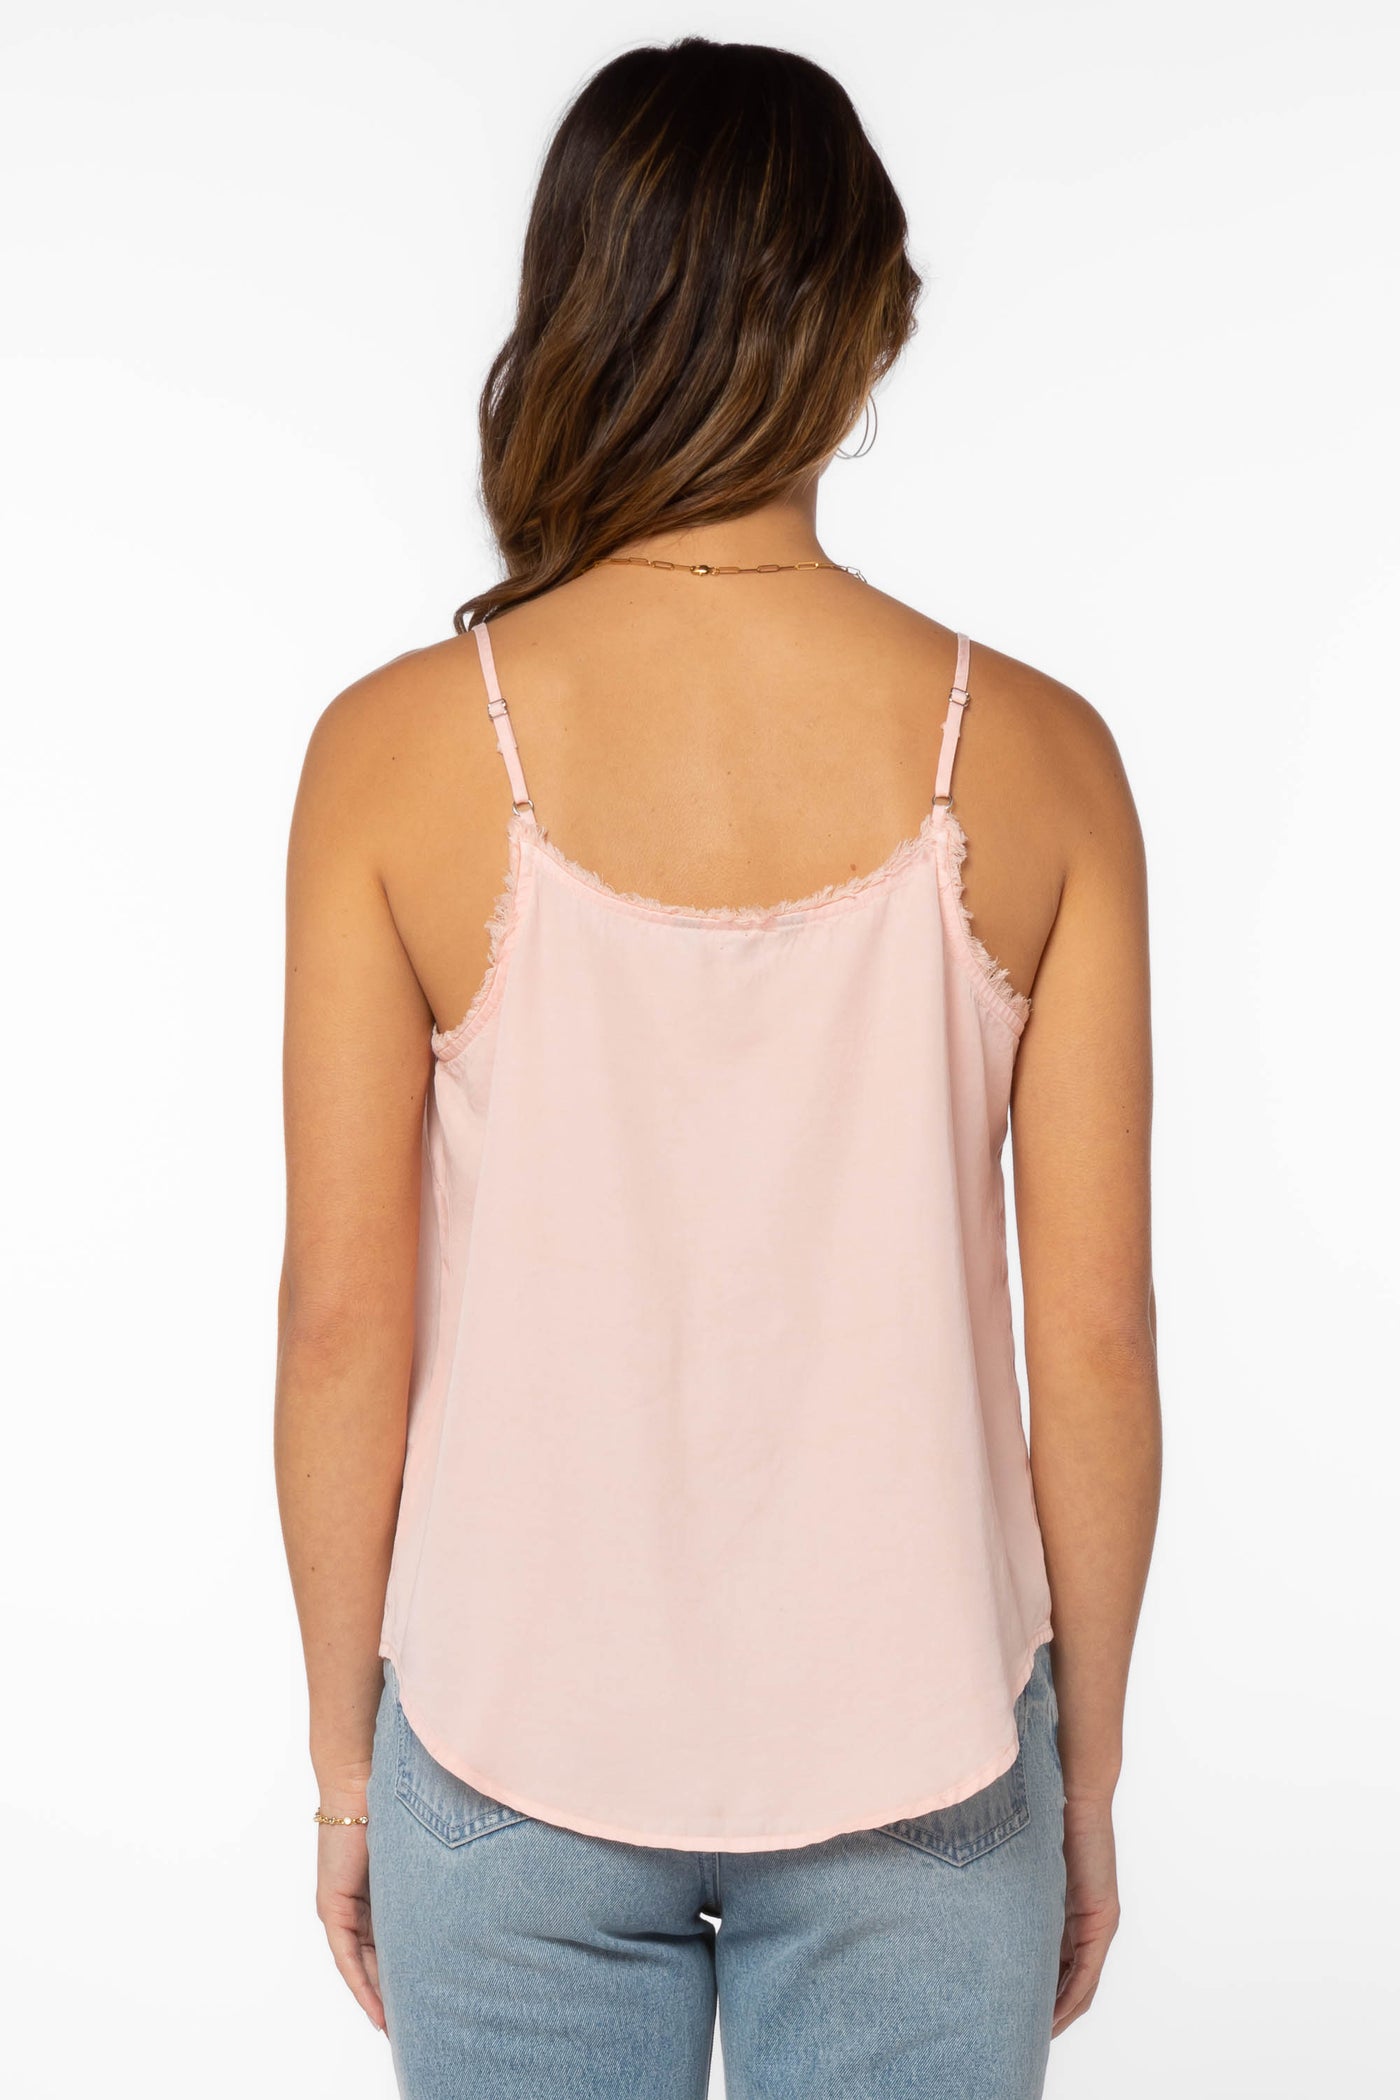 Victory Pink Cami - Tops - Velvet Heart Clothing